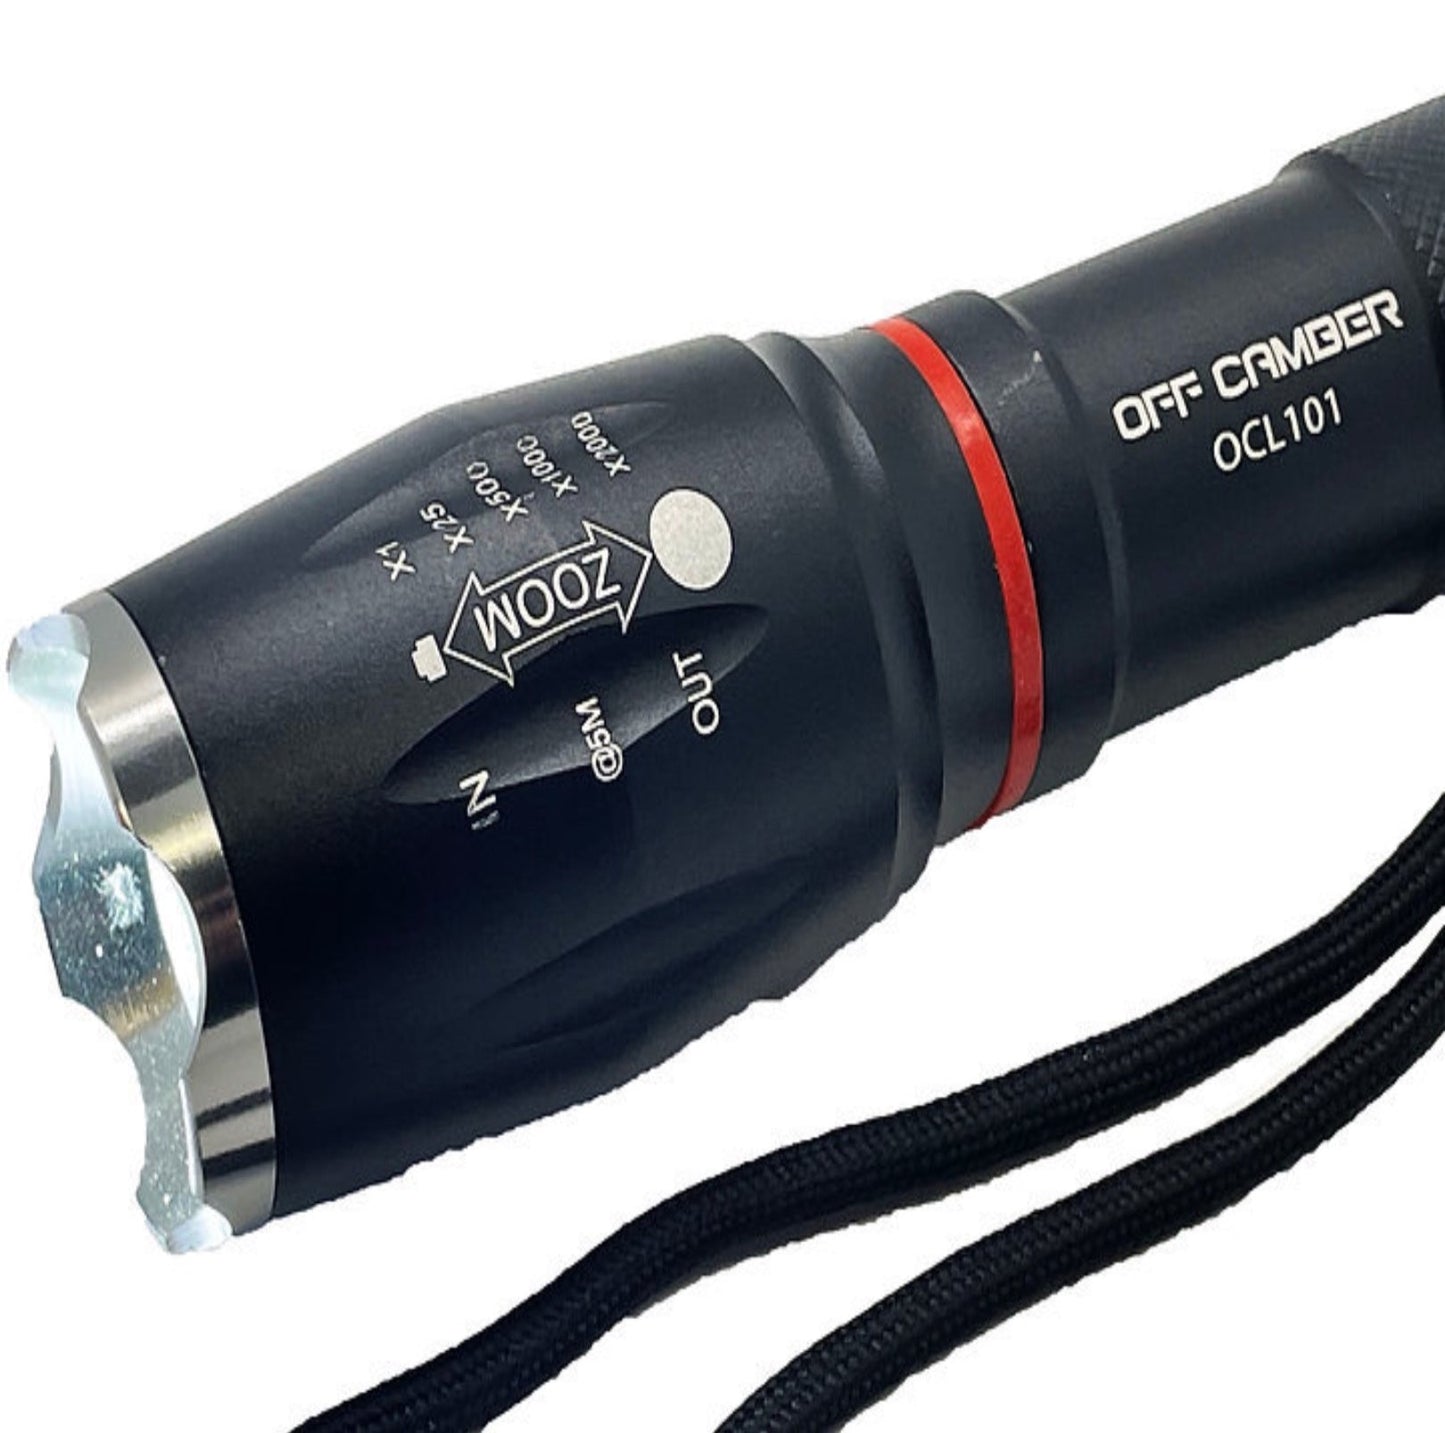 TAC-PRO Off Camber Lighting LED Flashlight Rechargeable USB